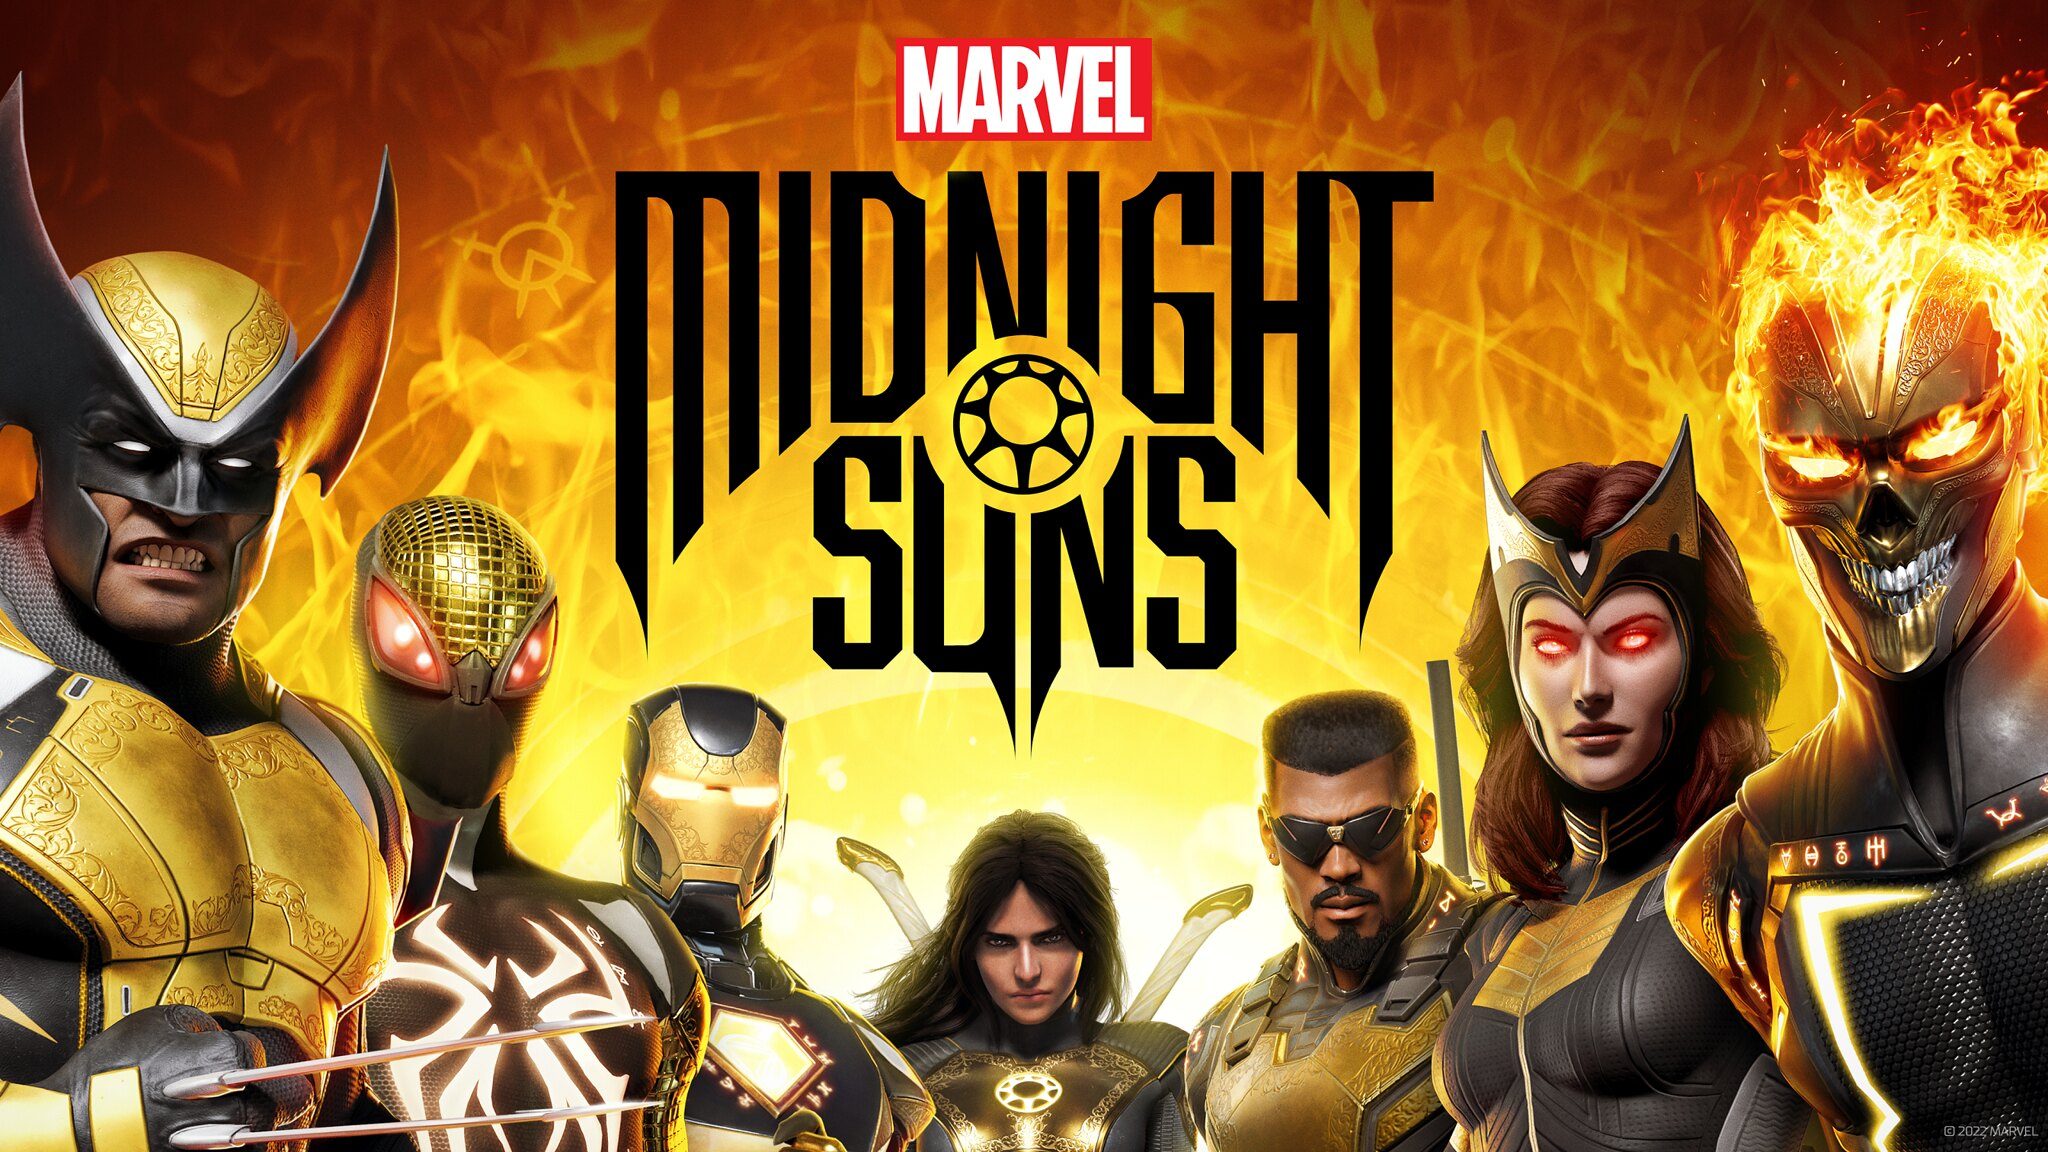 Marvel's Midnight Suns' rounds up heroes for vampiric combat